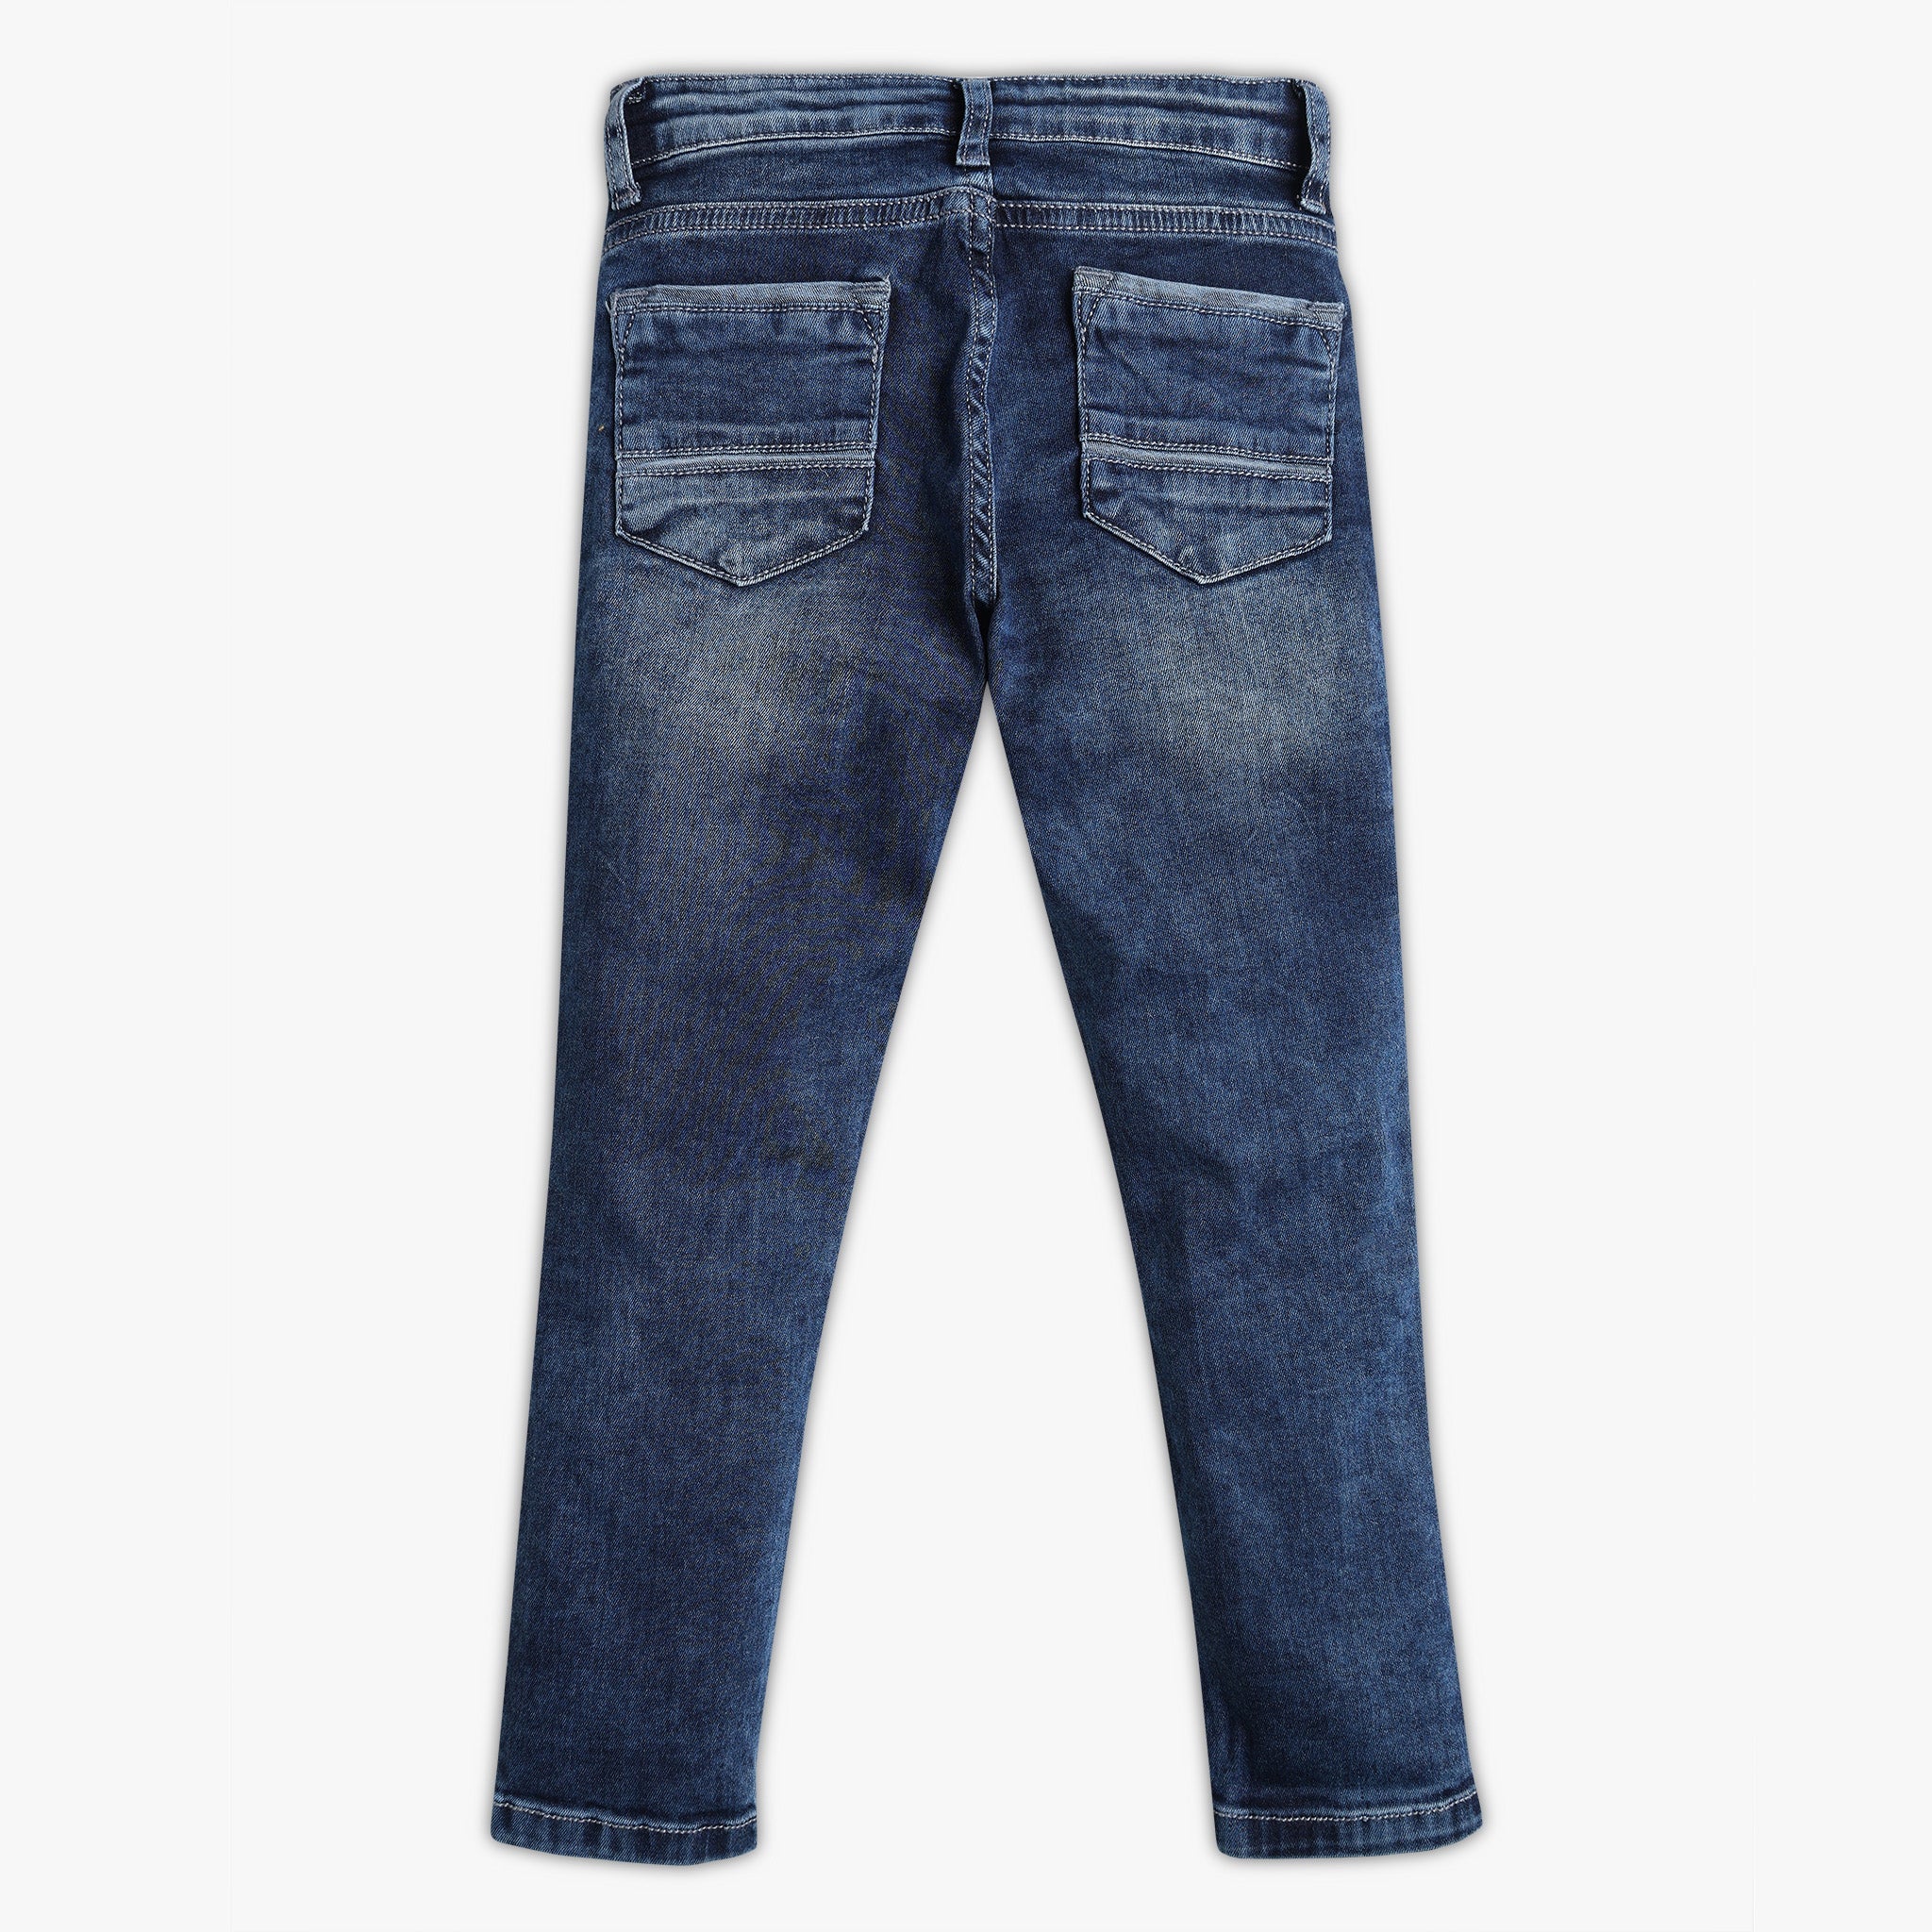 Boys' Fear of God Essentials Jeans